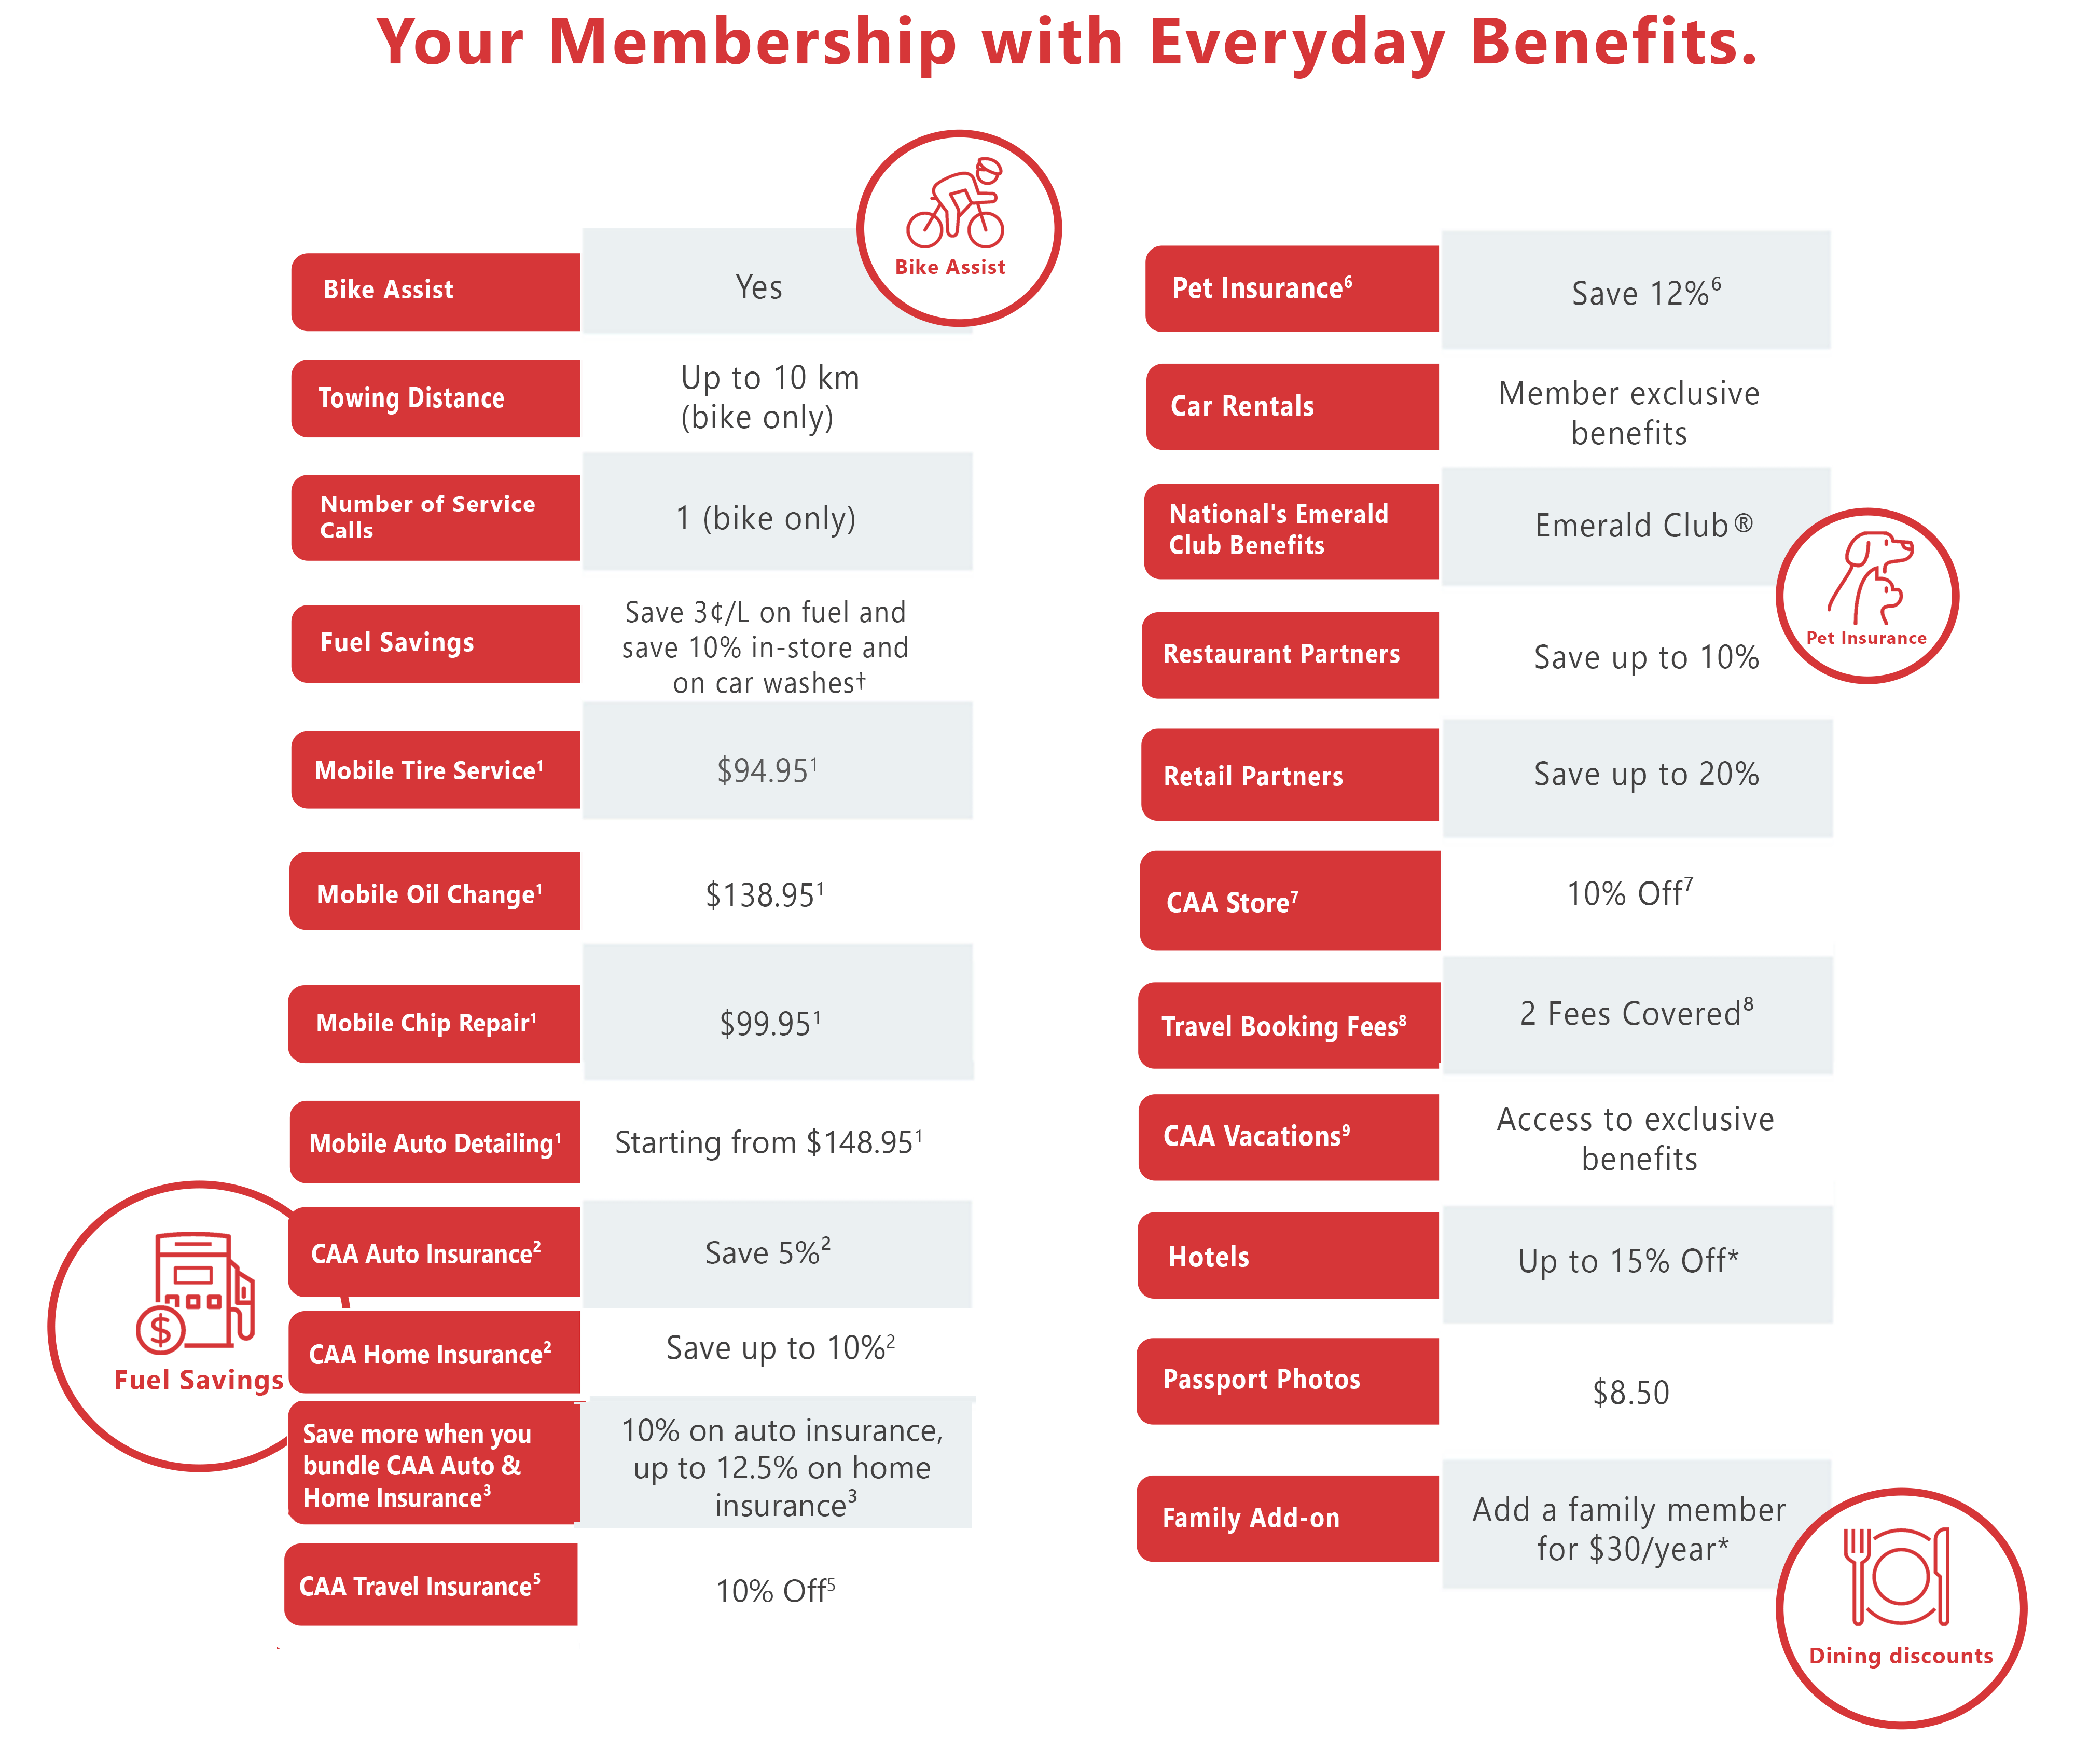 All the benefits listed with CAA's Everyday Membership